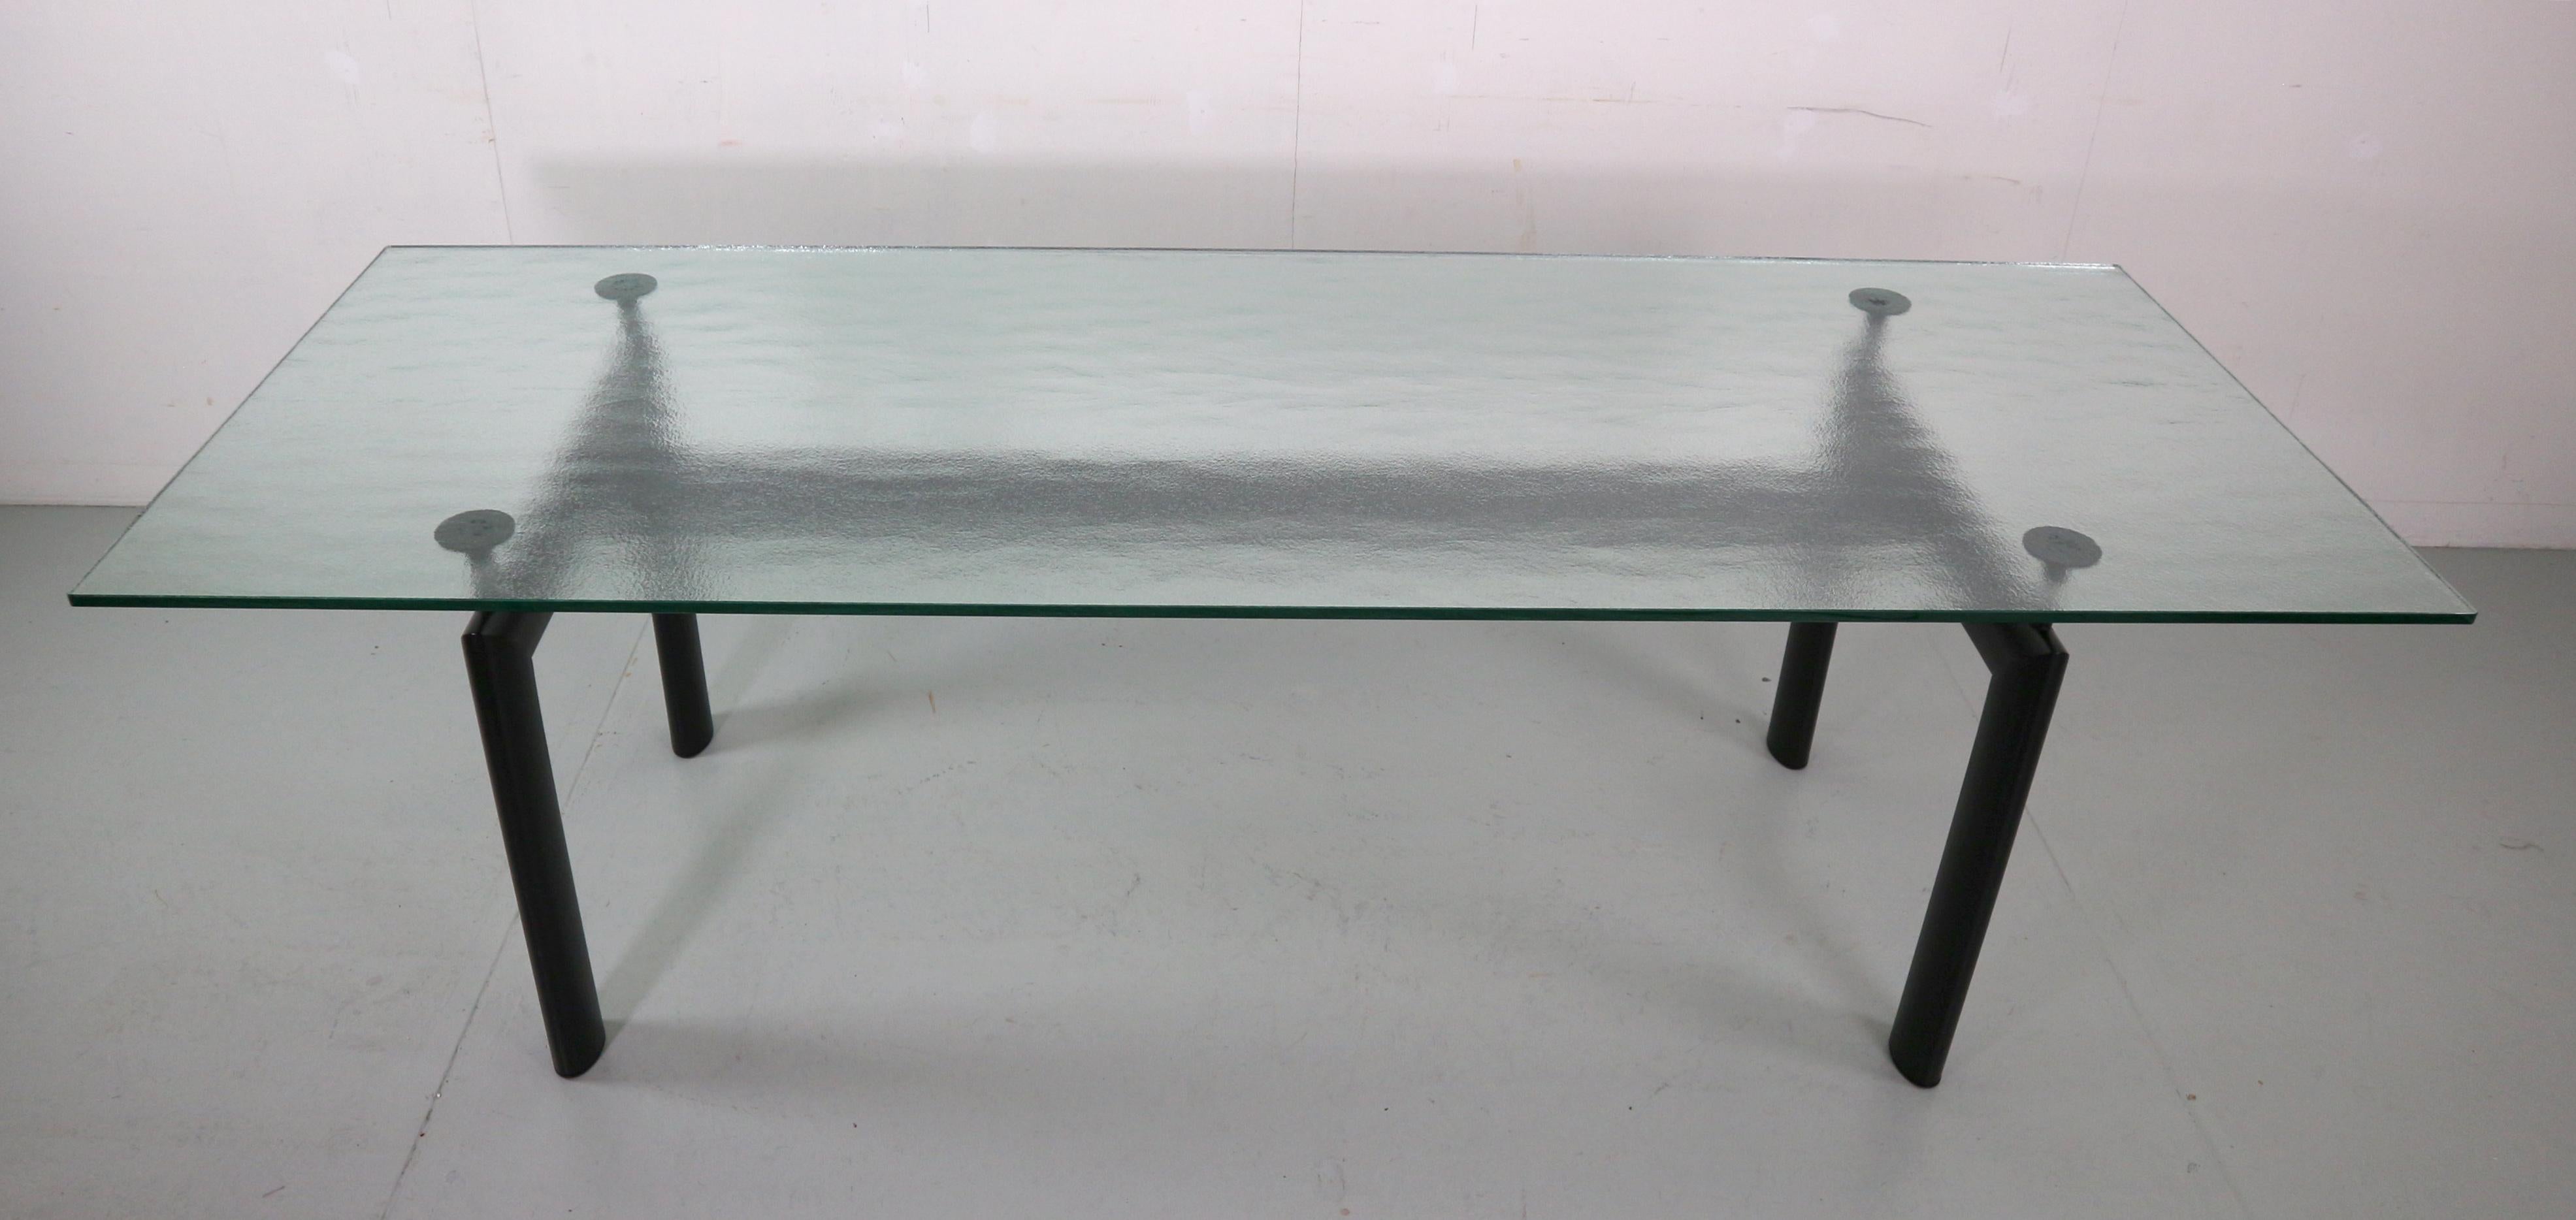 The idea informing the LC6 table, which was launched at the 1929 Salon d’Automne in Paris, lies in the distinction between the support and what is supported, in other words, the base and the table top. The separation of the two parts is highlighted